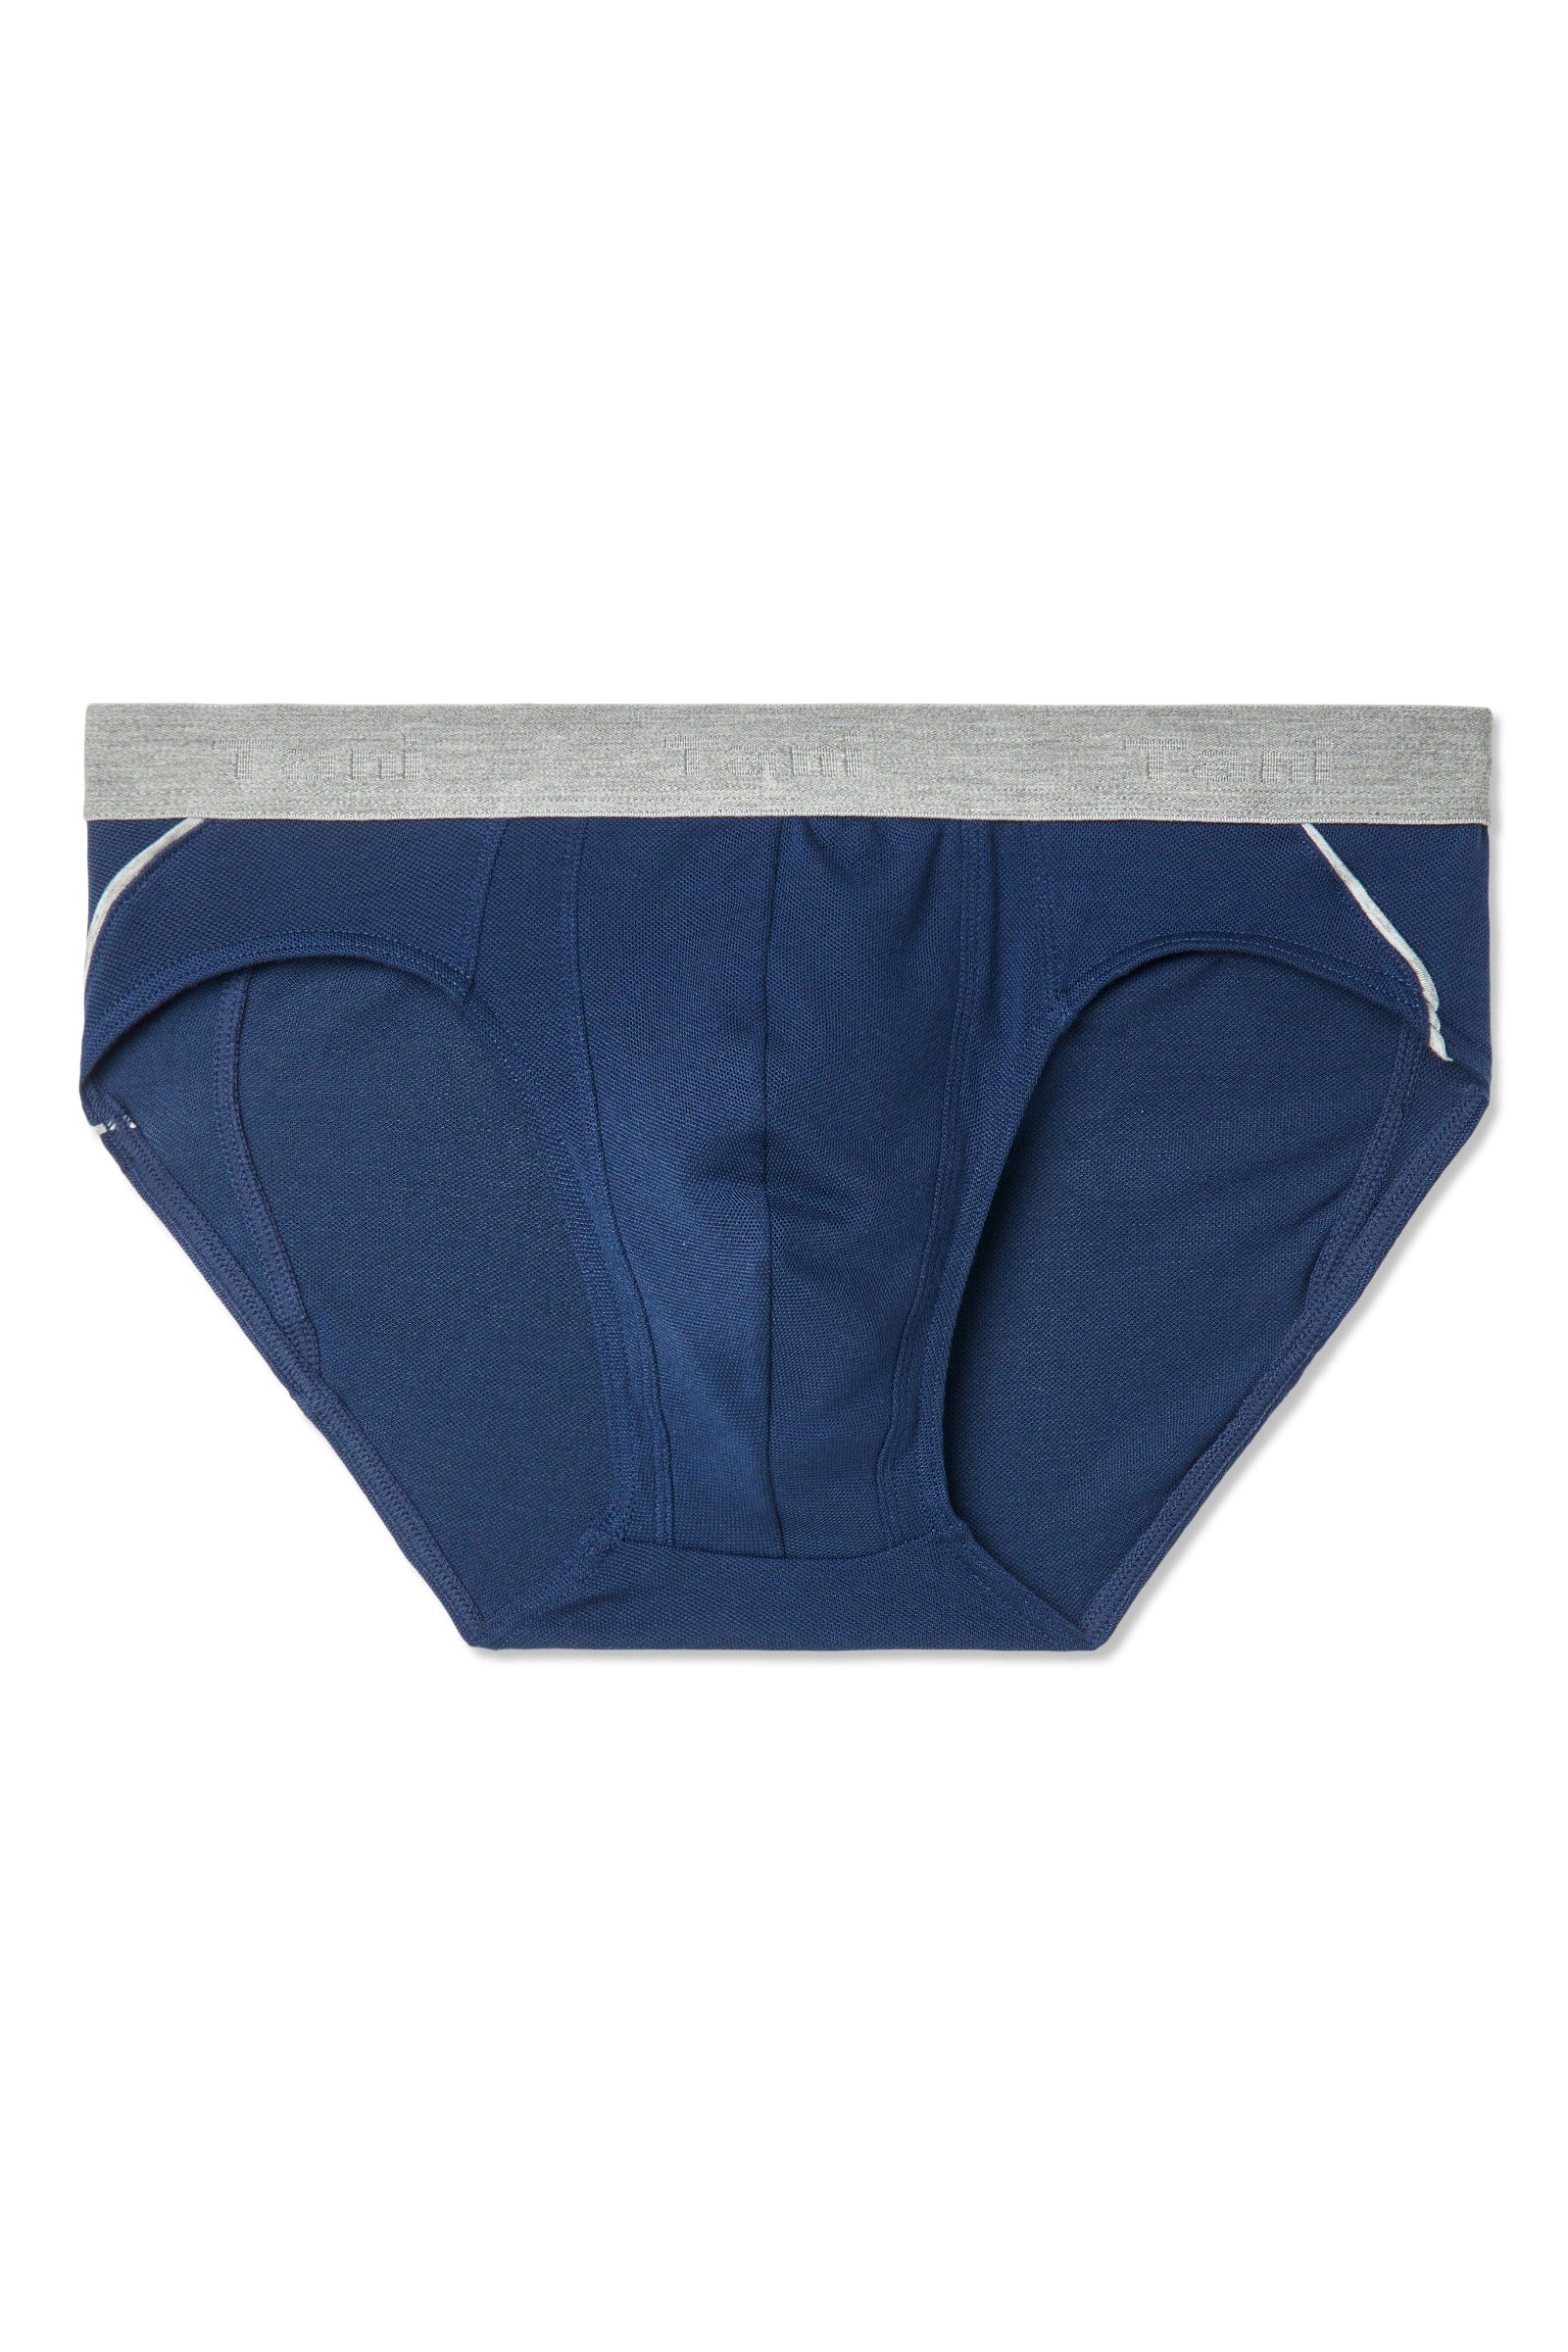 Image of AirFit Contrast Brief